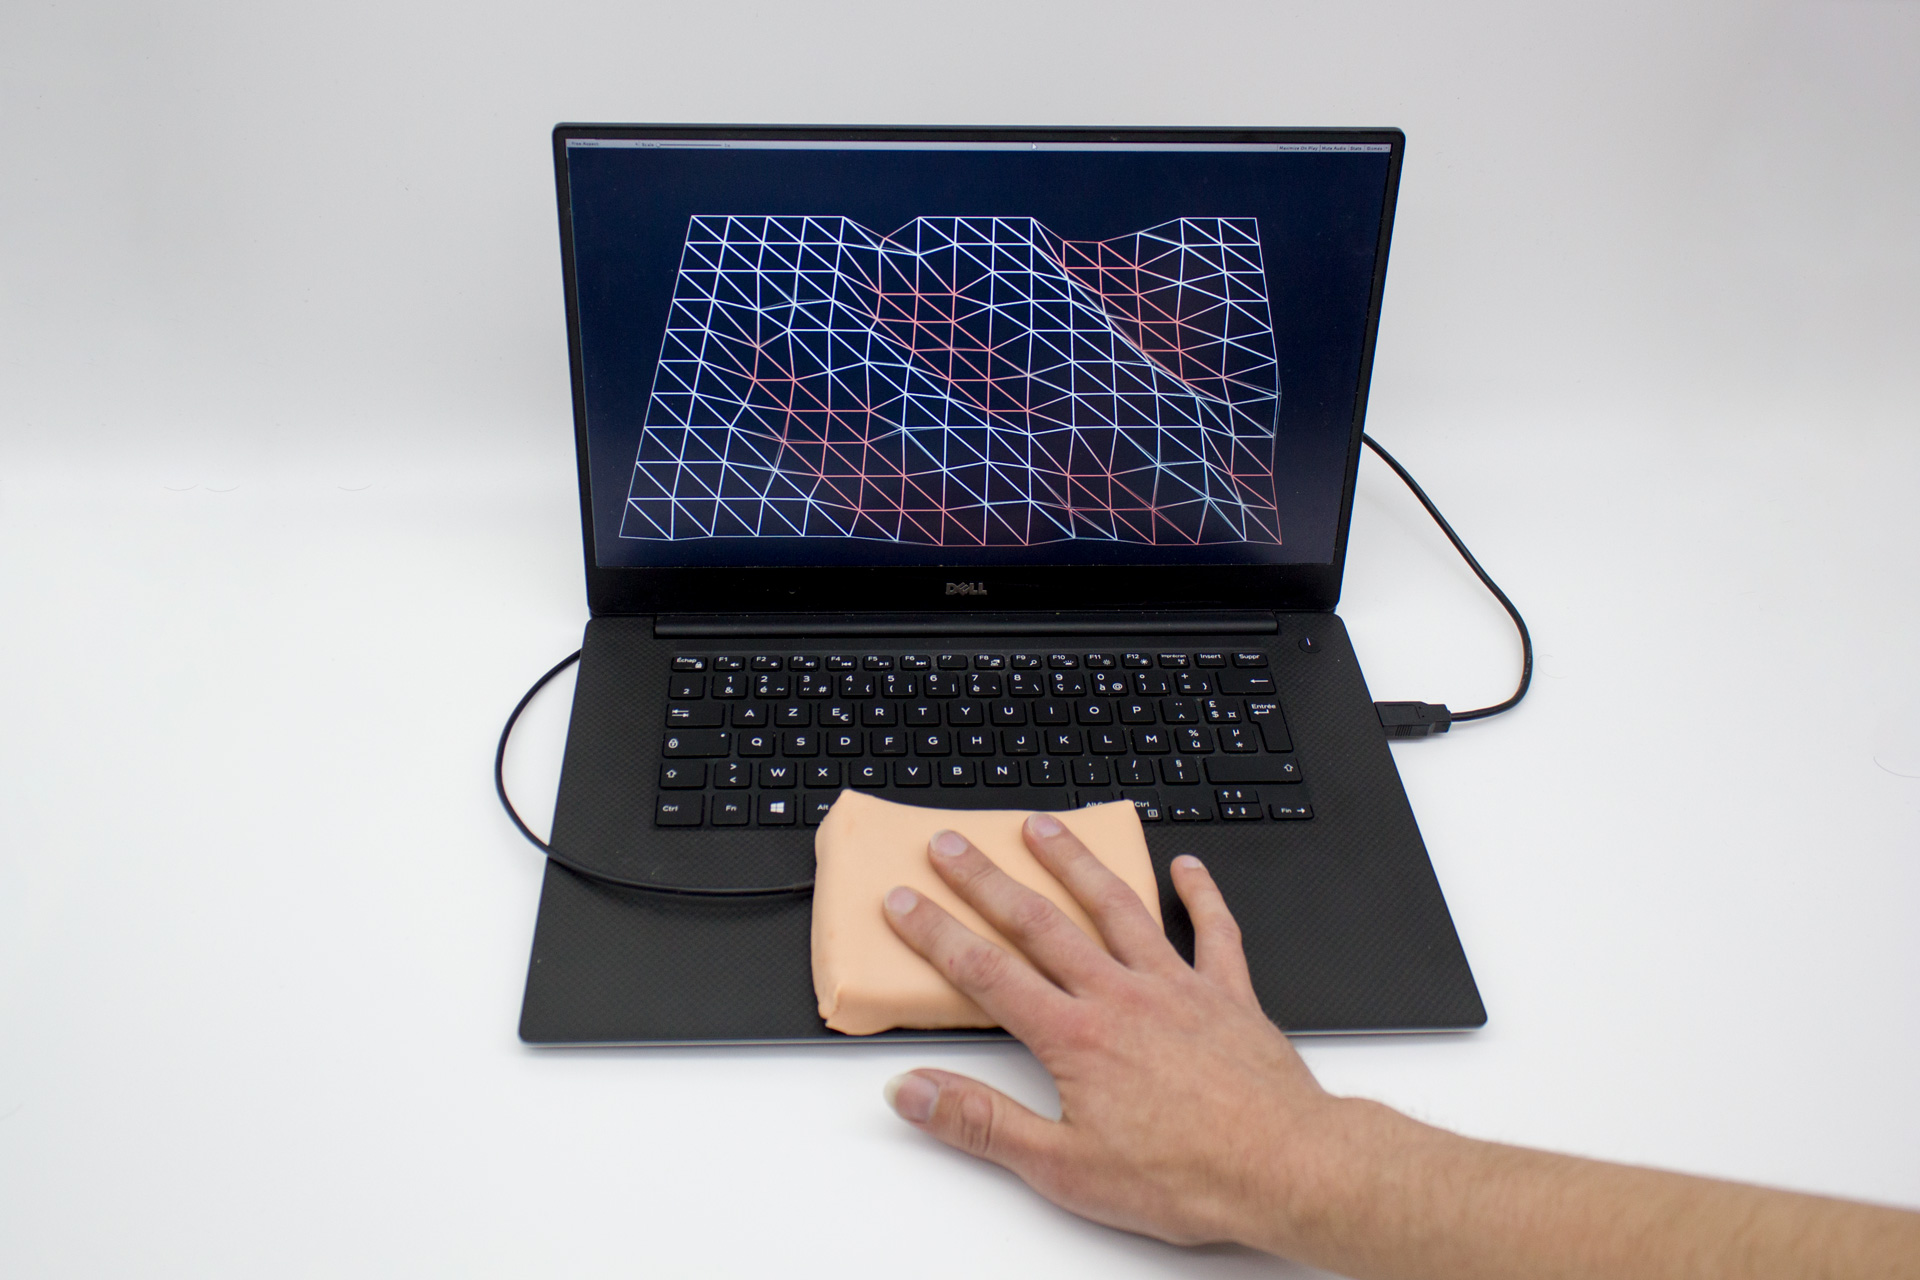 A new interface developed by researchers in Bristol and Paris takes touch technology to the next level by providing an artificial skin-like membrane for augmenting interactive devices such as phones, wearables or computers Source: Marc Teyssier